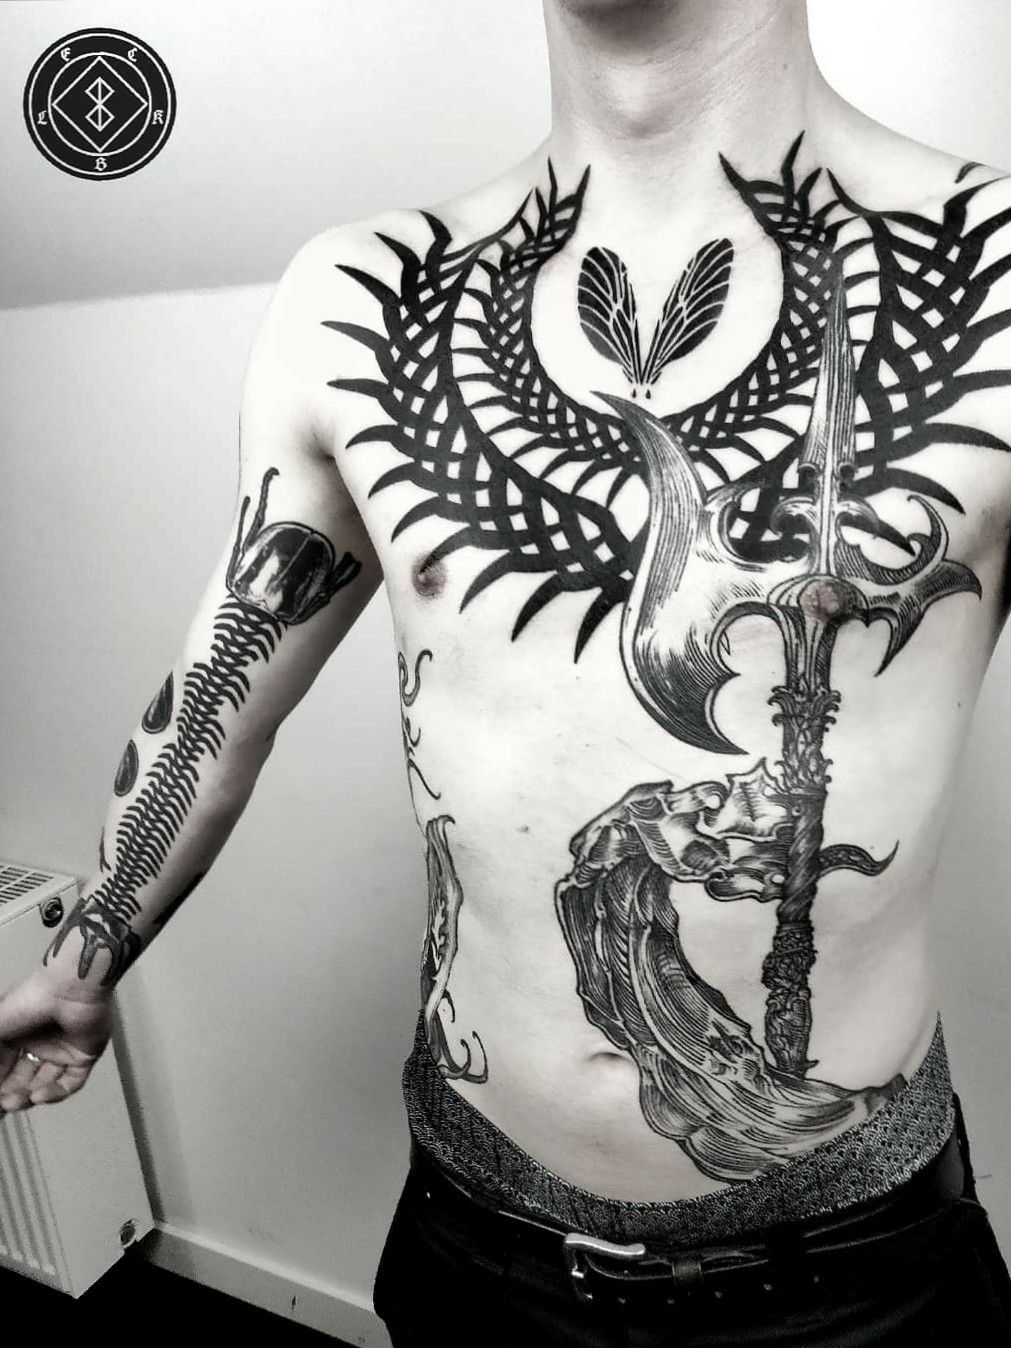 Satanic Tattoo Images Browse 15790 Stock Photos  Vectors Free Download  with Trial  Shutterstock